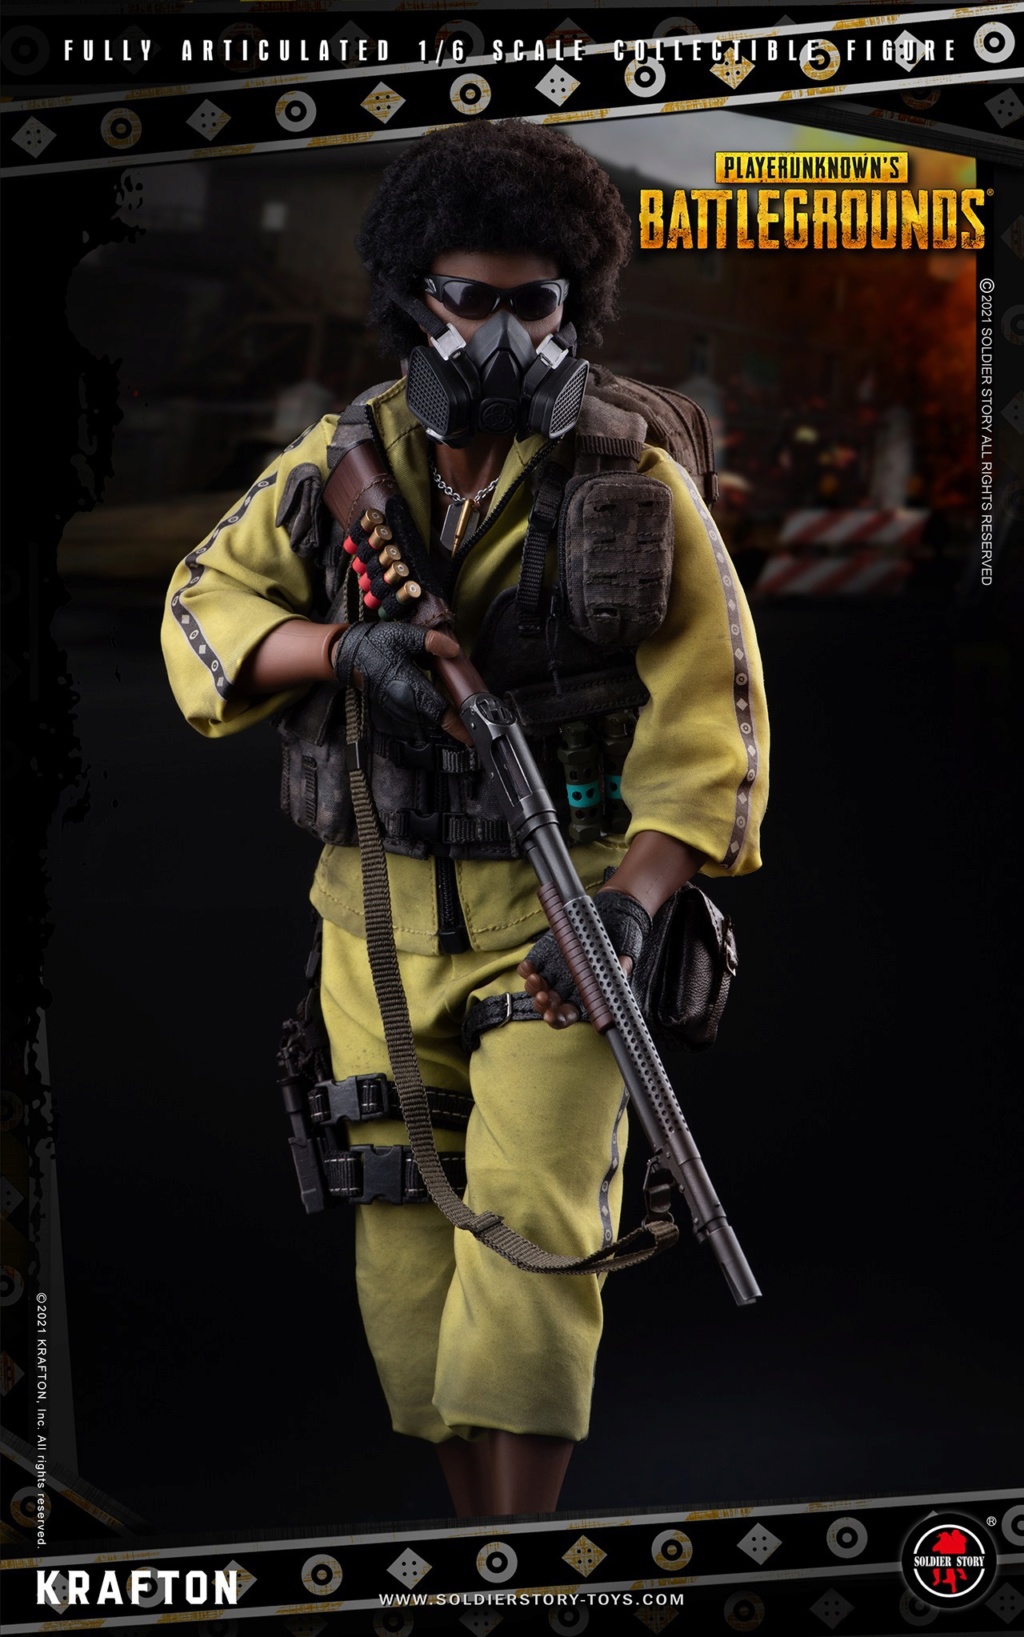 Soldierstory - NEW PRODUCT: Soldier Story & Krafton: SSG-003 1/6 Scale Playerunknown’s Battlegrounds Action Figure 84612310